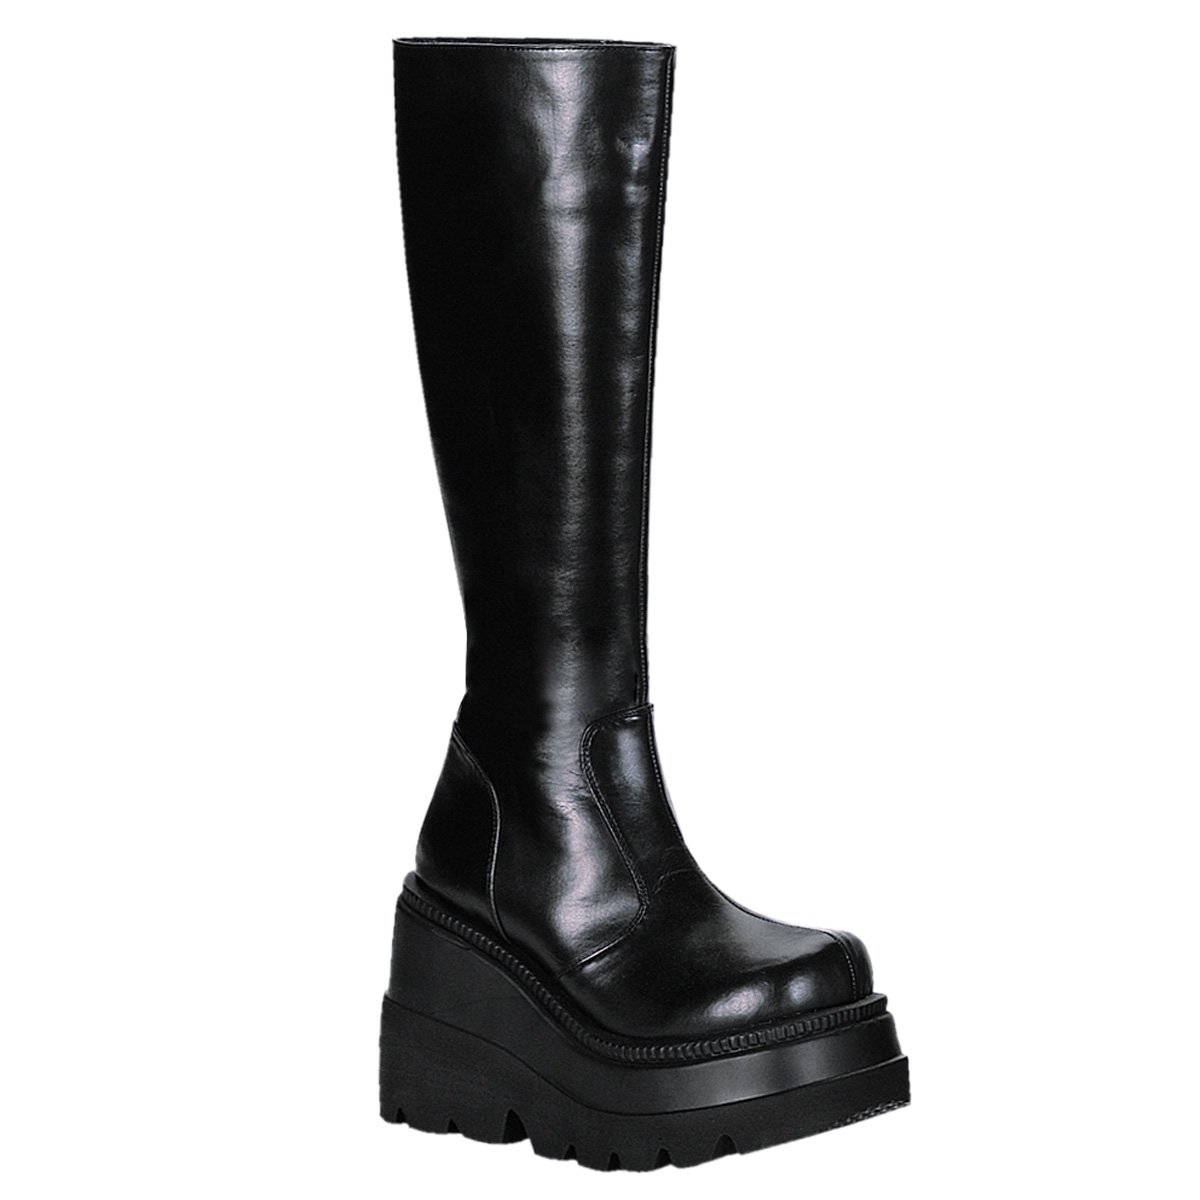 Demonia Shaker-100 Women's MidCalf & Knee High Boots | Buy Sexy Shoes at Shoefreaks.ca